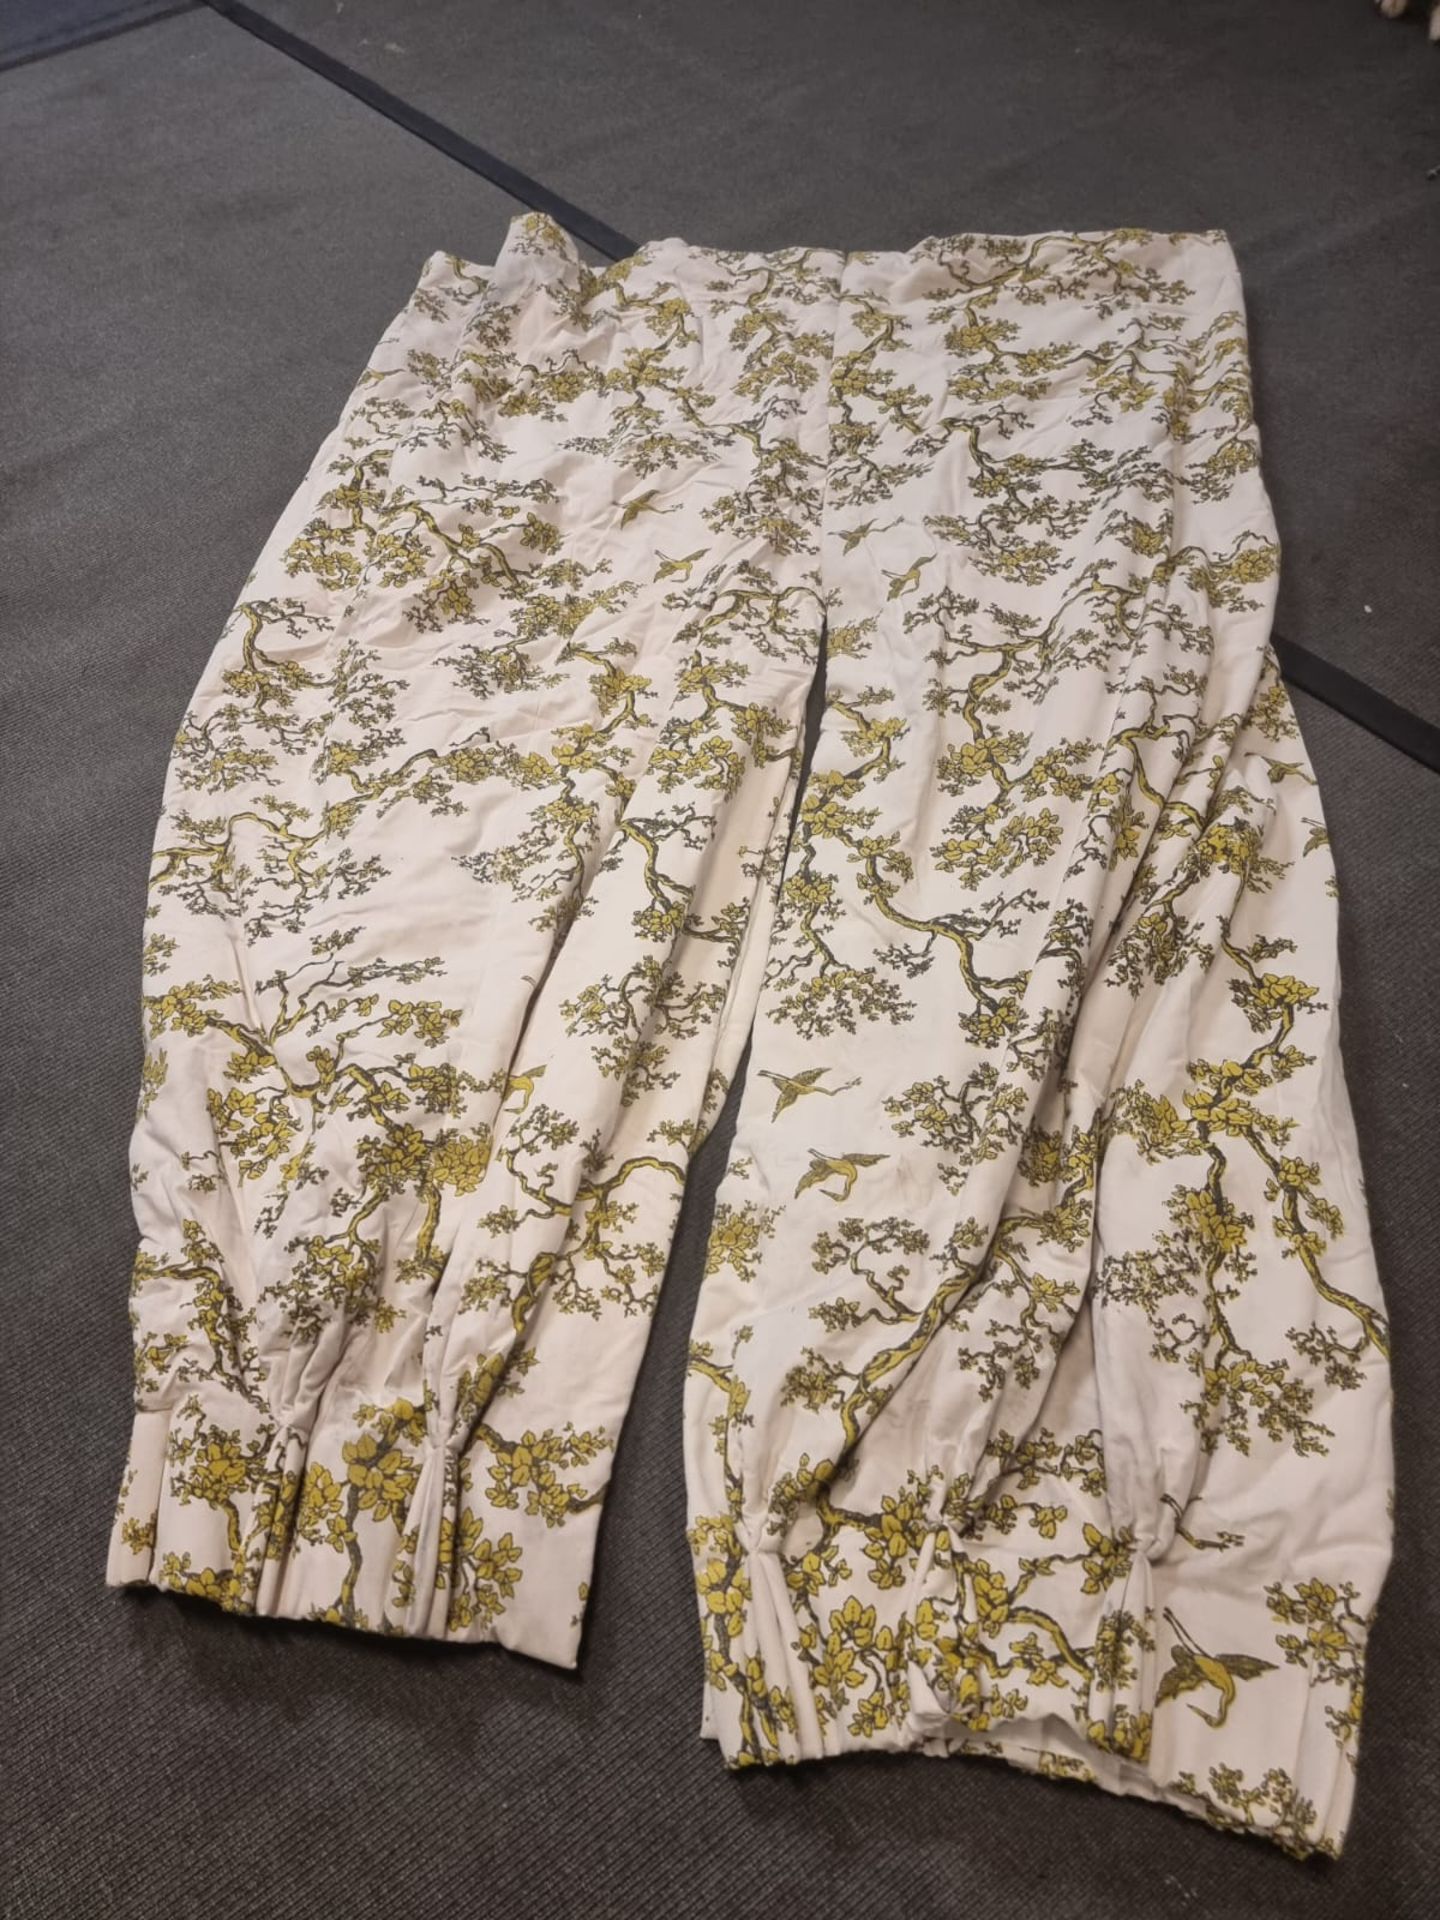 A pair of fully lined luxury cotton drapes in cream with exotic tree and birds repeating pattern - Image 5 of 6